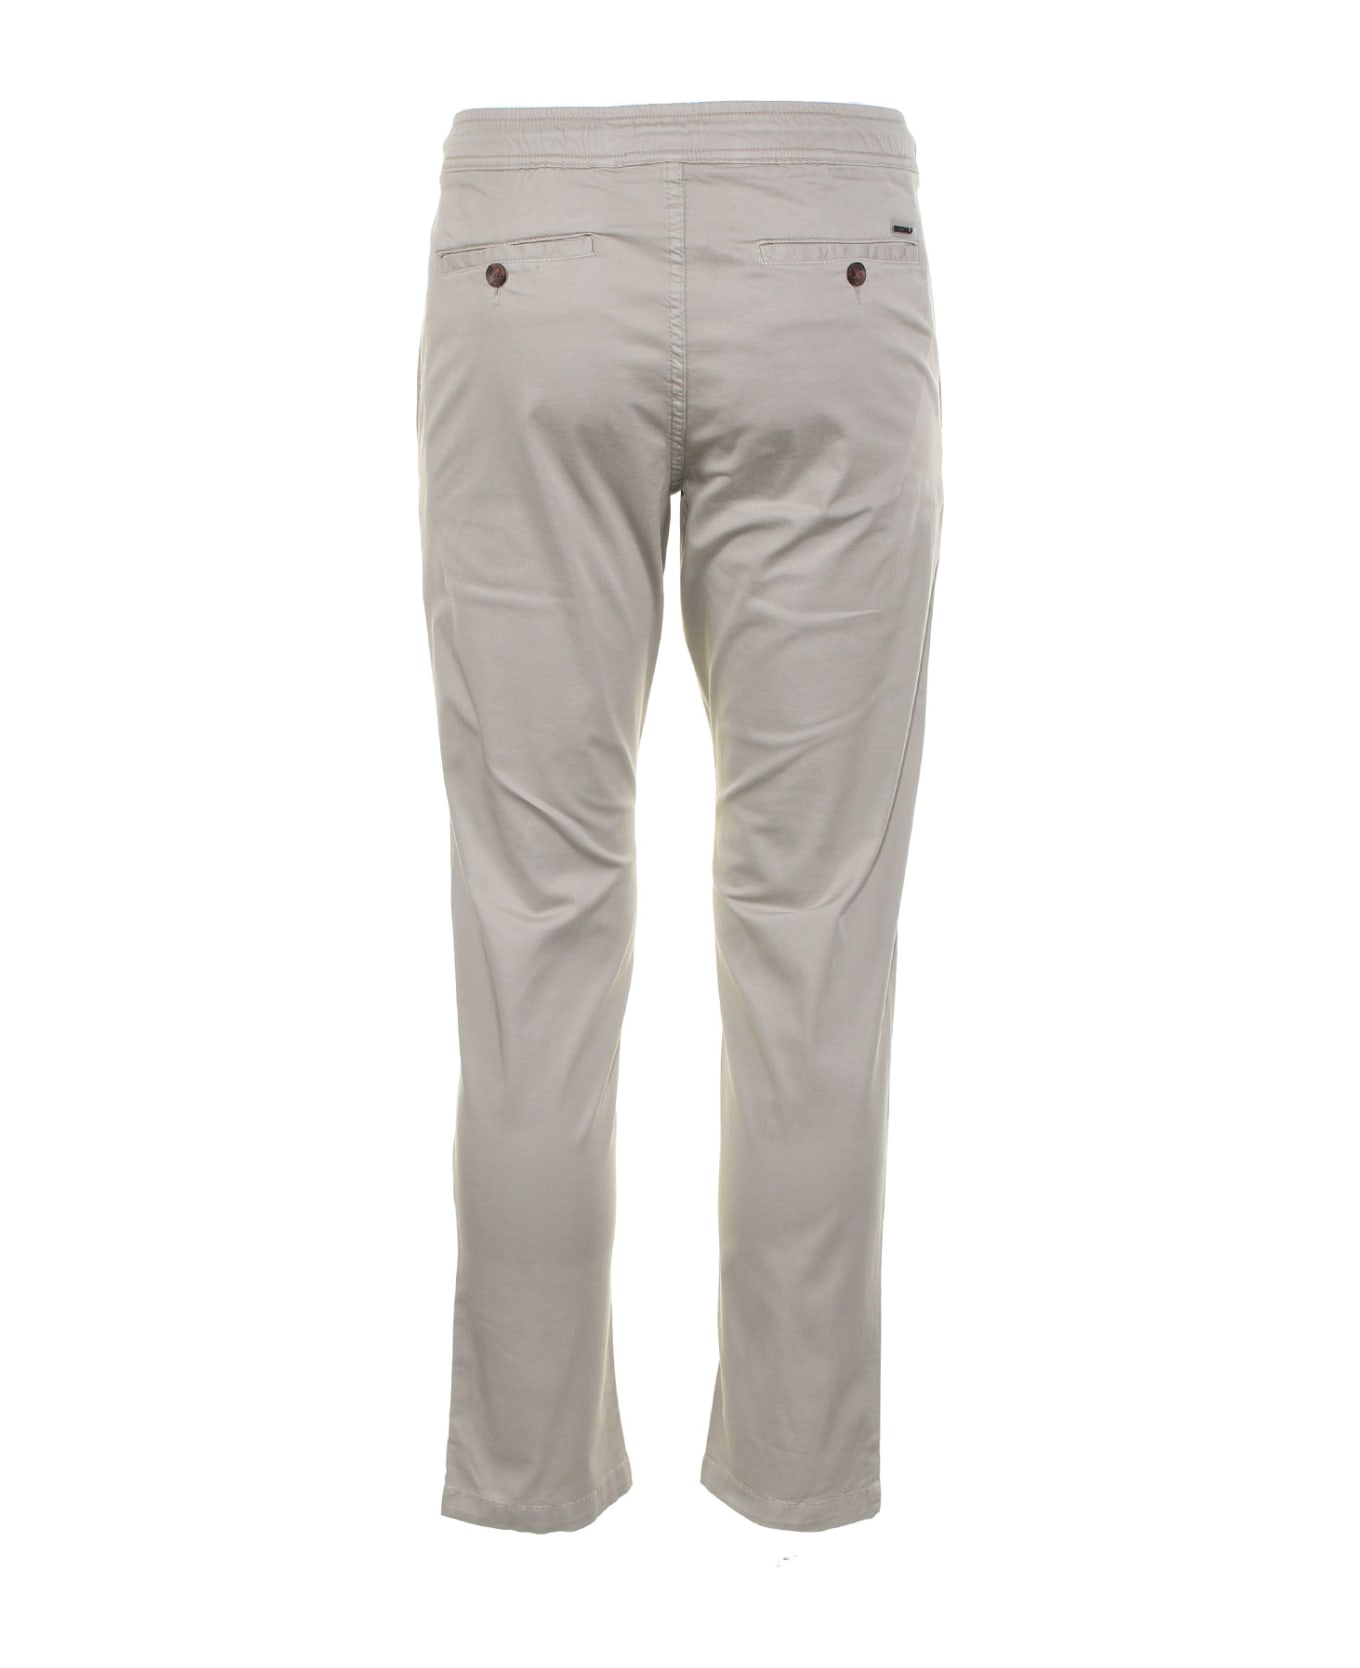 Ecoalf Trousers With Drawstring At The Waist - STONE